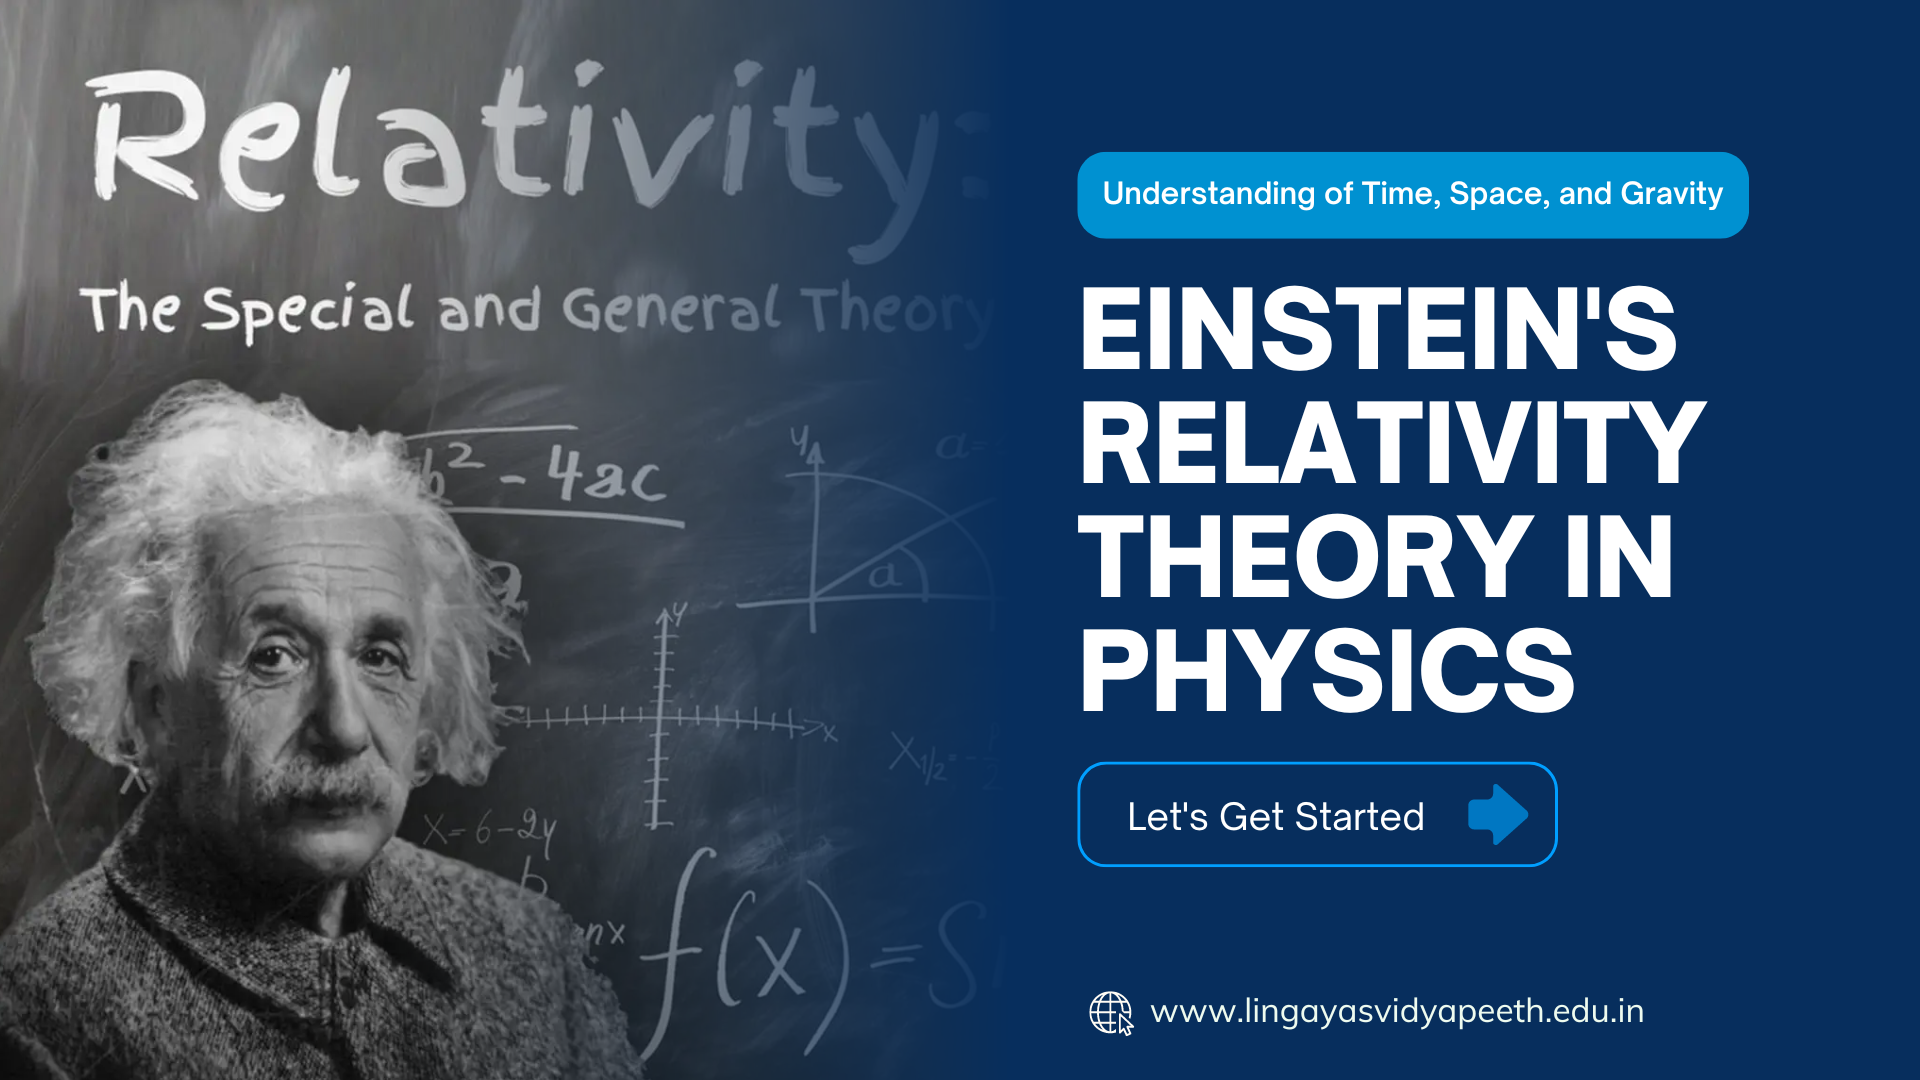 Know the Theory of Einstein’s Relativity in Physics